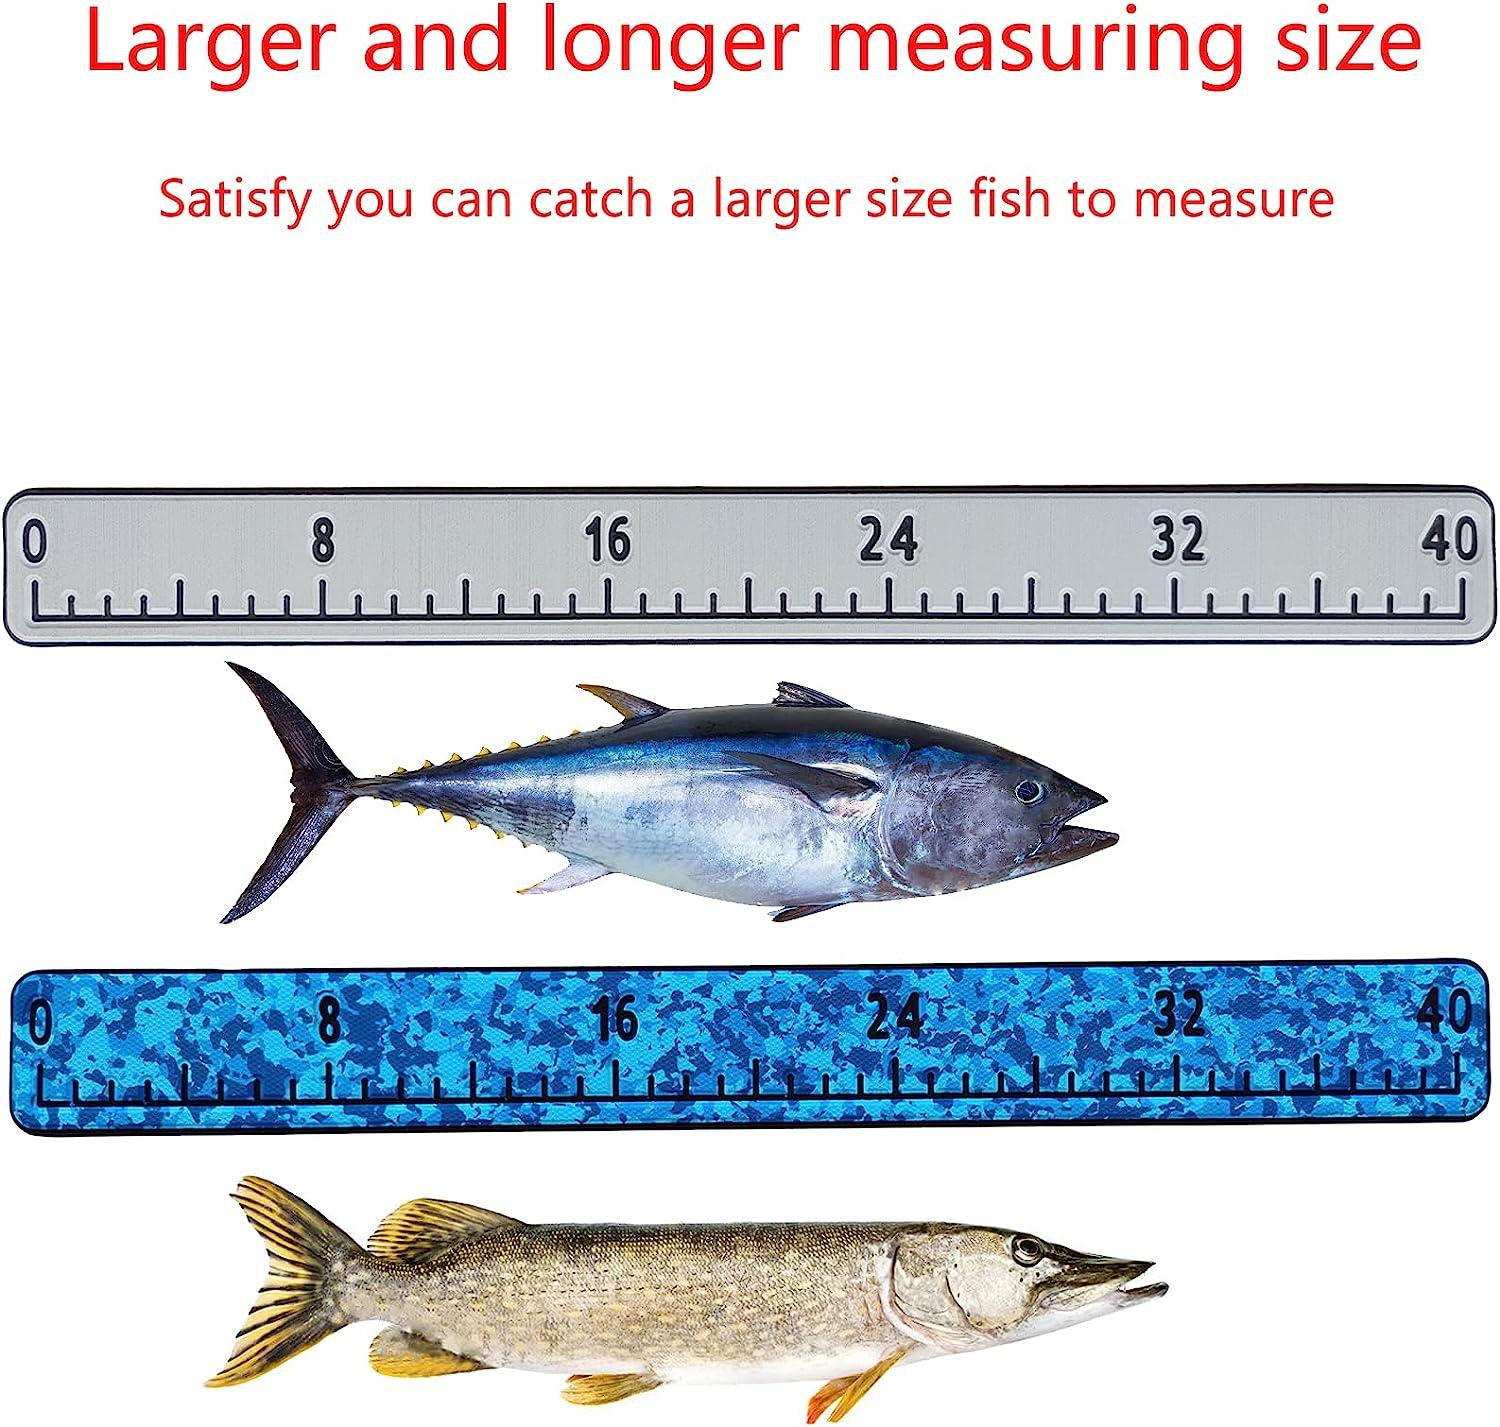 Hzkaicun/Fish Ruler/40/with Backing Adhesive/Fish Measuring Sticker/Foam Fish  Ruler for Boat/Fish Measuring Board/Suitable for/Fish Boat/Cooler/Kayak /Yacht/Fish Ruler Boat Accessories 40 Light gray